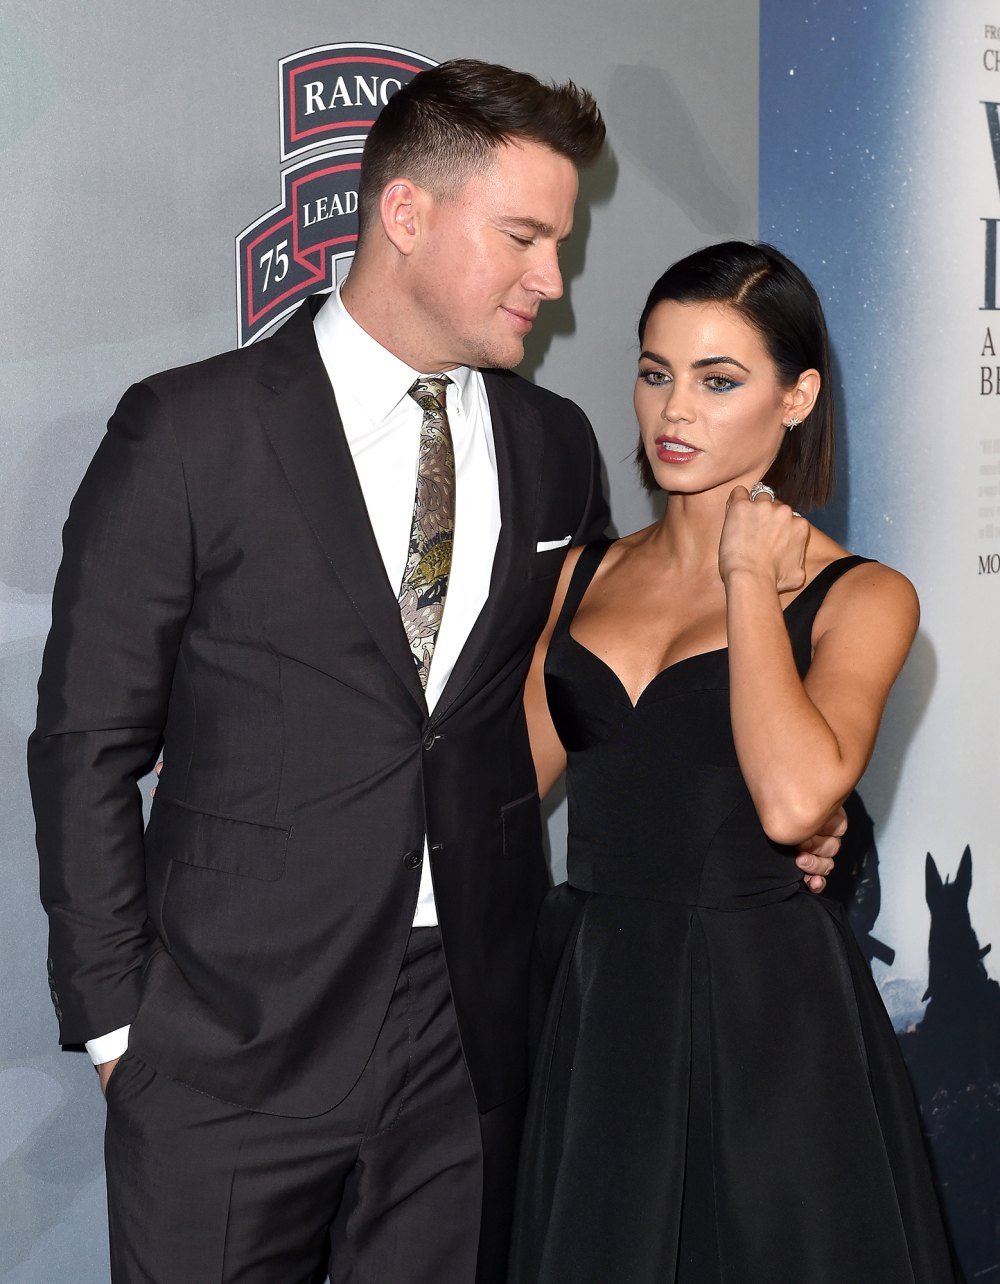 Jenna Dewan Claims Channing Tatum Hid Details About 'Magic Mike' Earnings